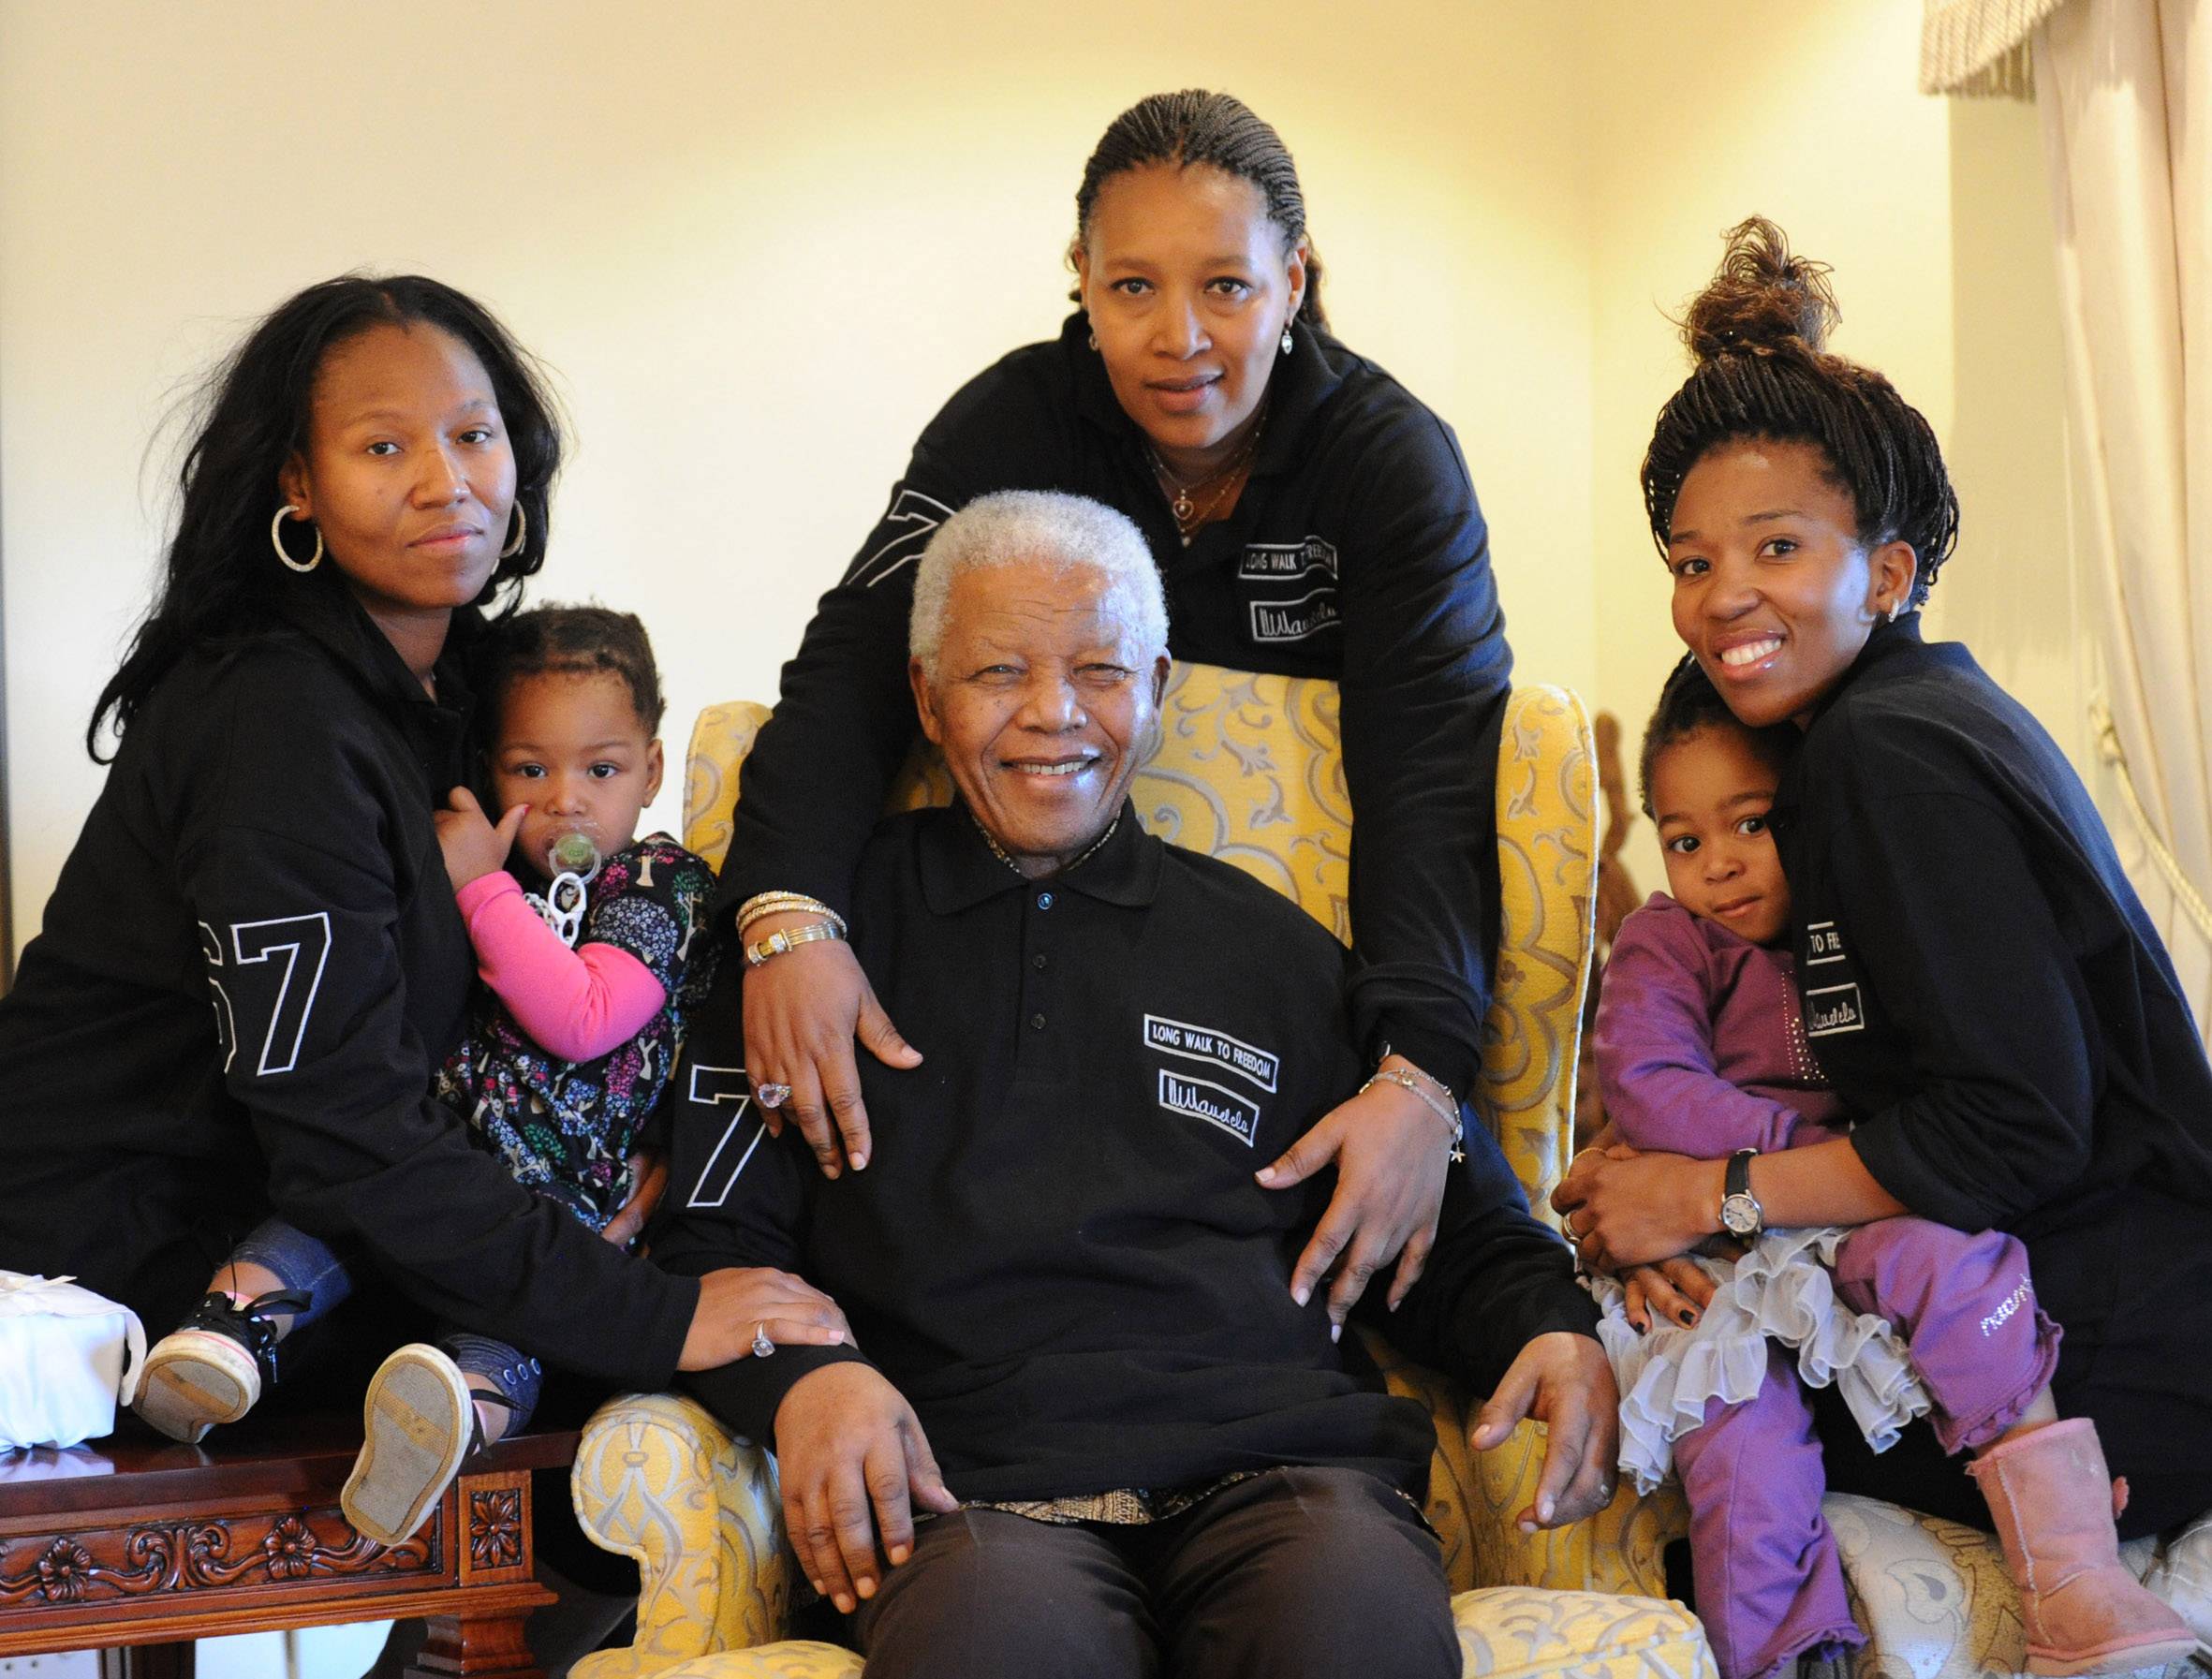 Happy Birthday Nelson Mandela! - On Monday, South African icon and former president Nelson Mandela celebrated his 93rd birthday with his family in his hometown of Qunu, which is about 600 miles south of Johannesburg. The United Nations also commemorated July 18 as Mandela Day, encouraging people around the world to use at least part of the day to volunteer for a good cause(Photo: AP Photo/Peter Morey Photographic-HO)